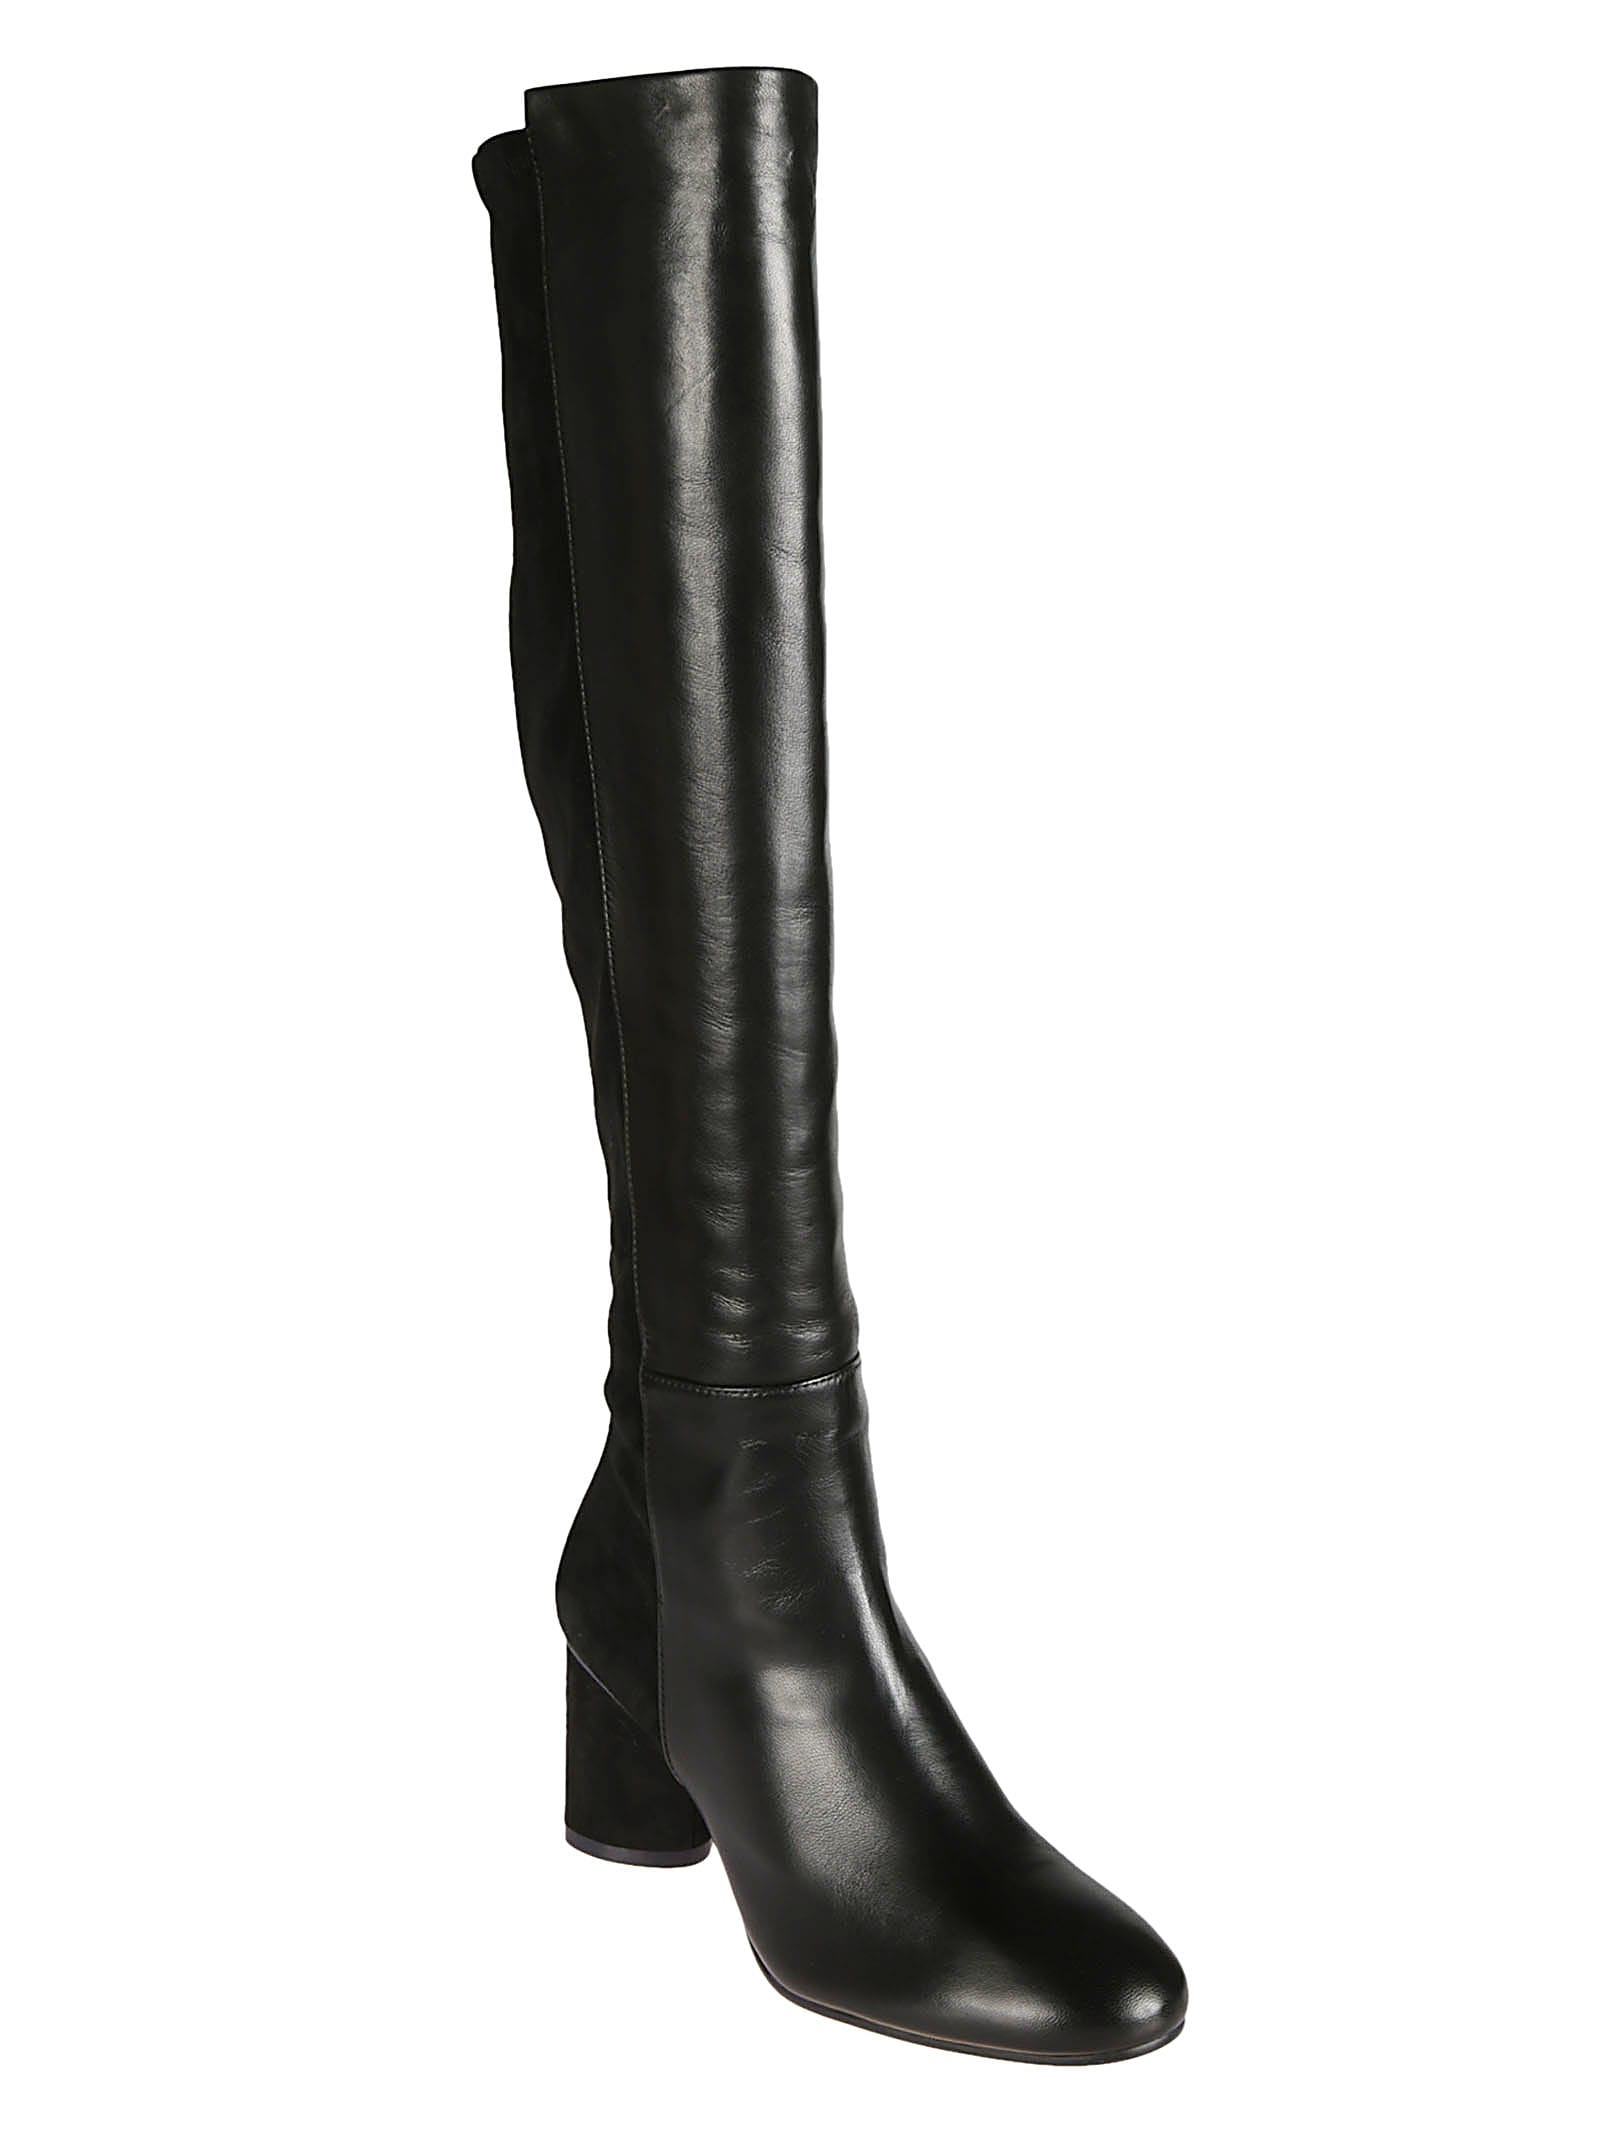 eloise 75 over the knee boot